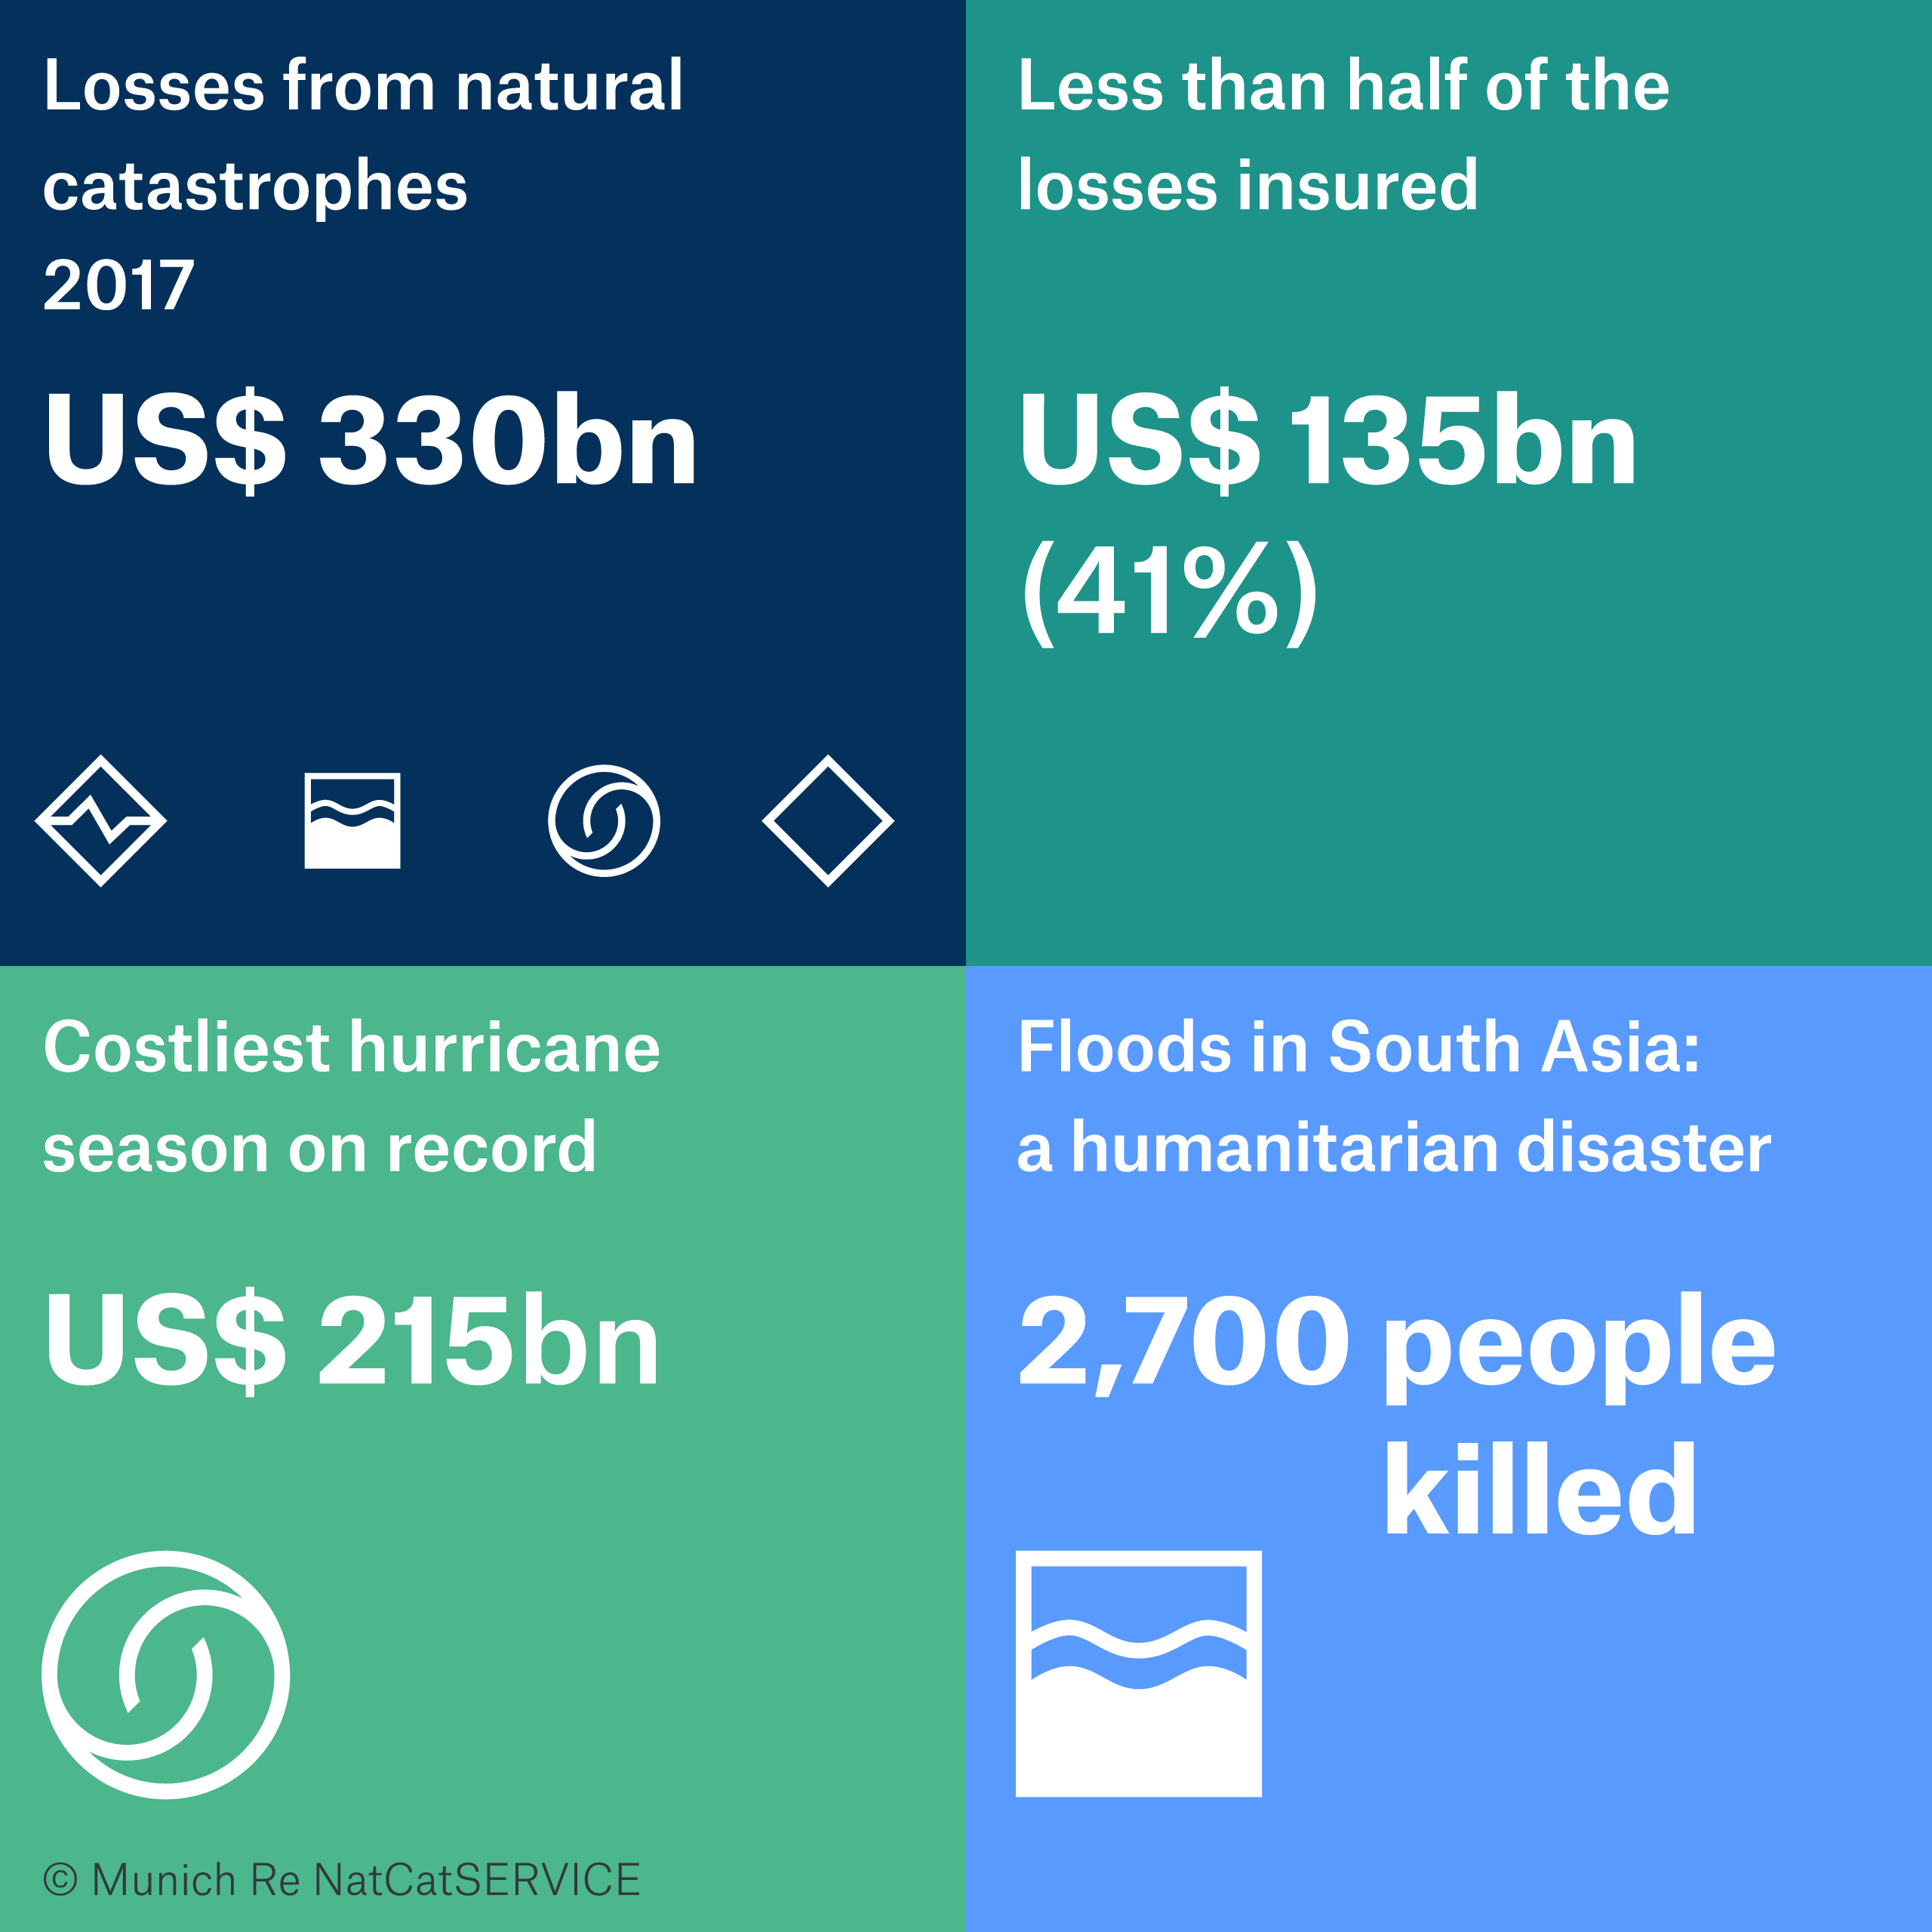 The overall loss figure of US$ 330bn, for all types of natural disaster, was almost double the ten-year, inflation-adjusted average of US$ 170bn.